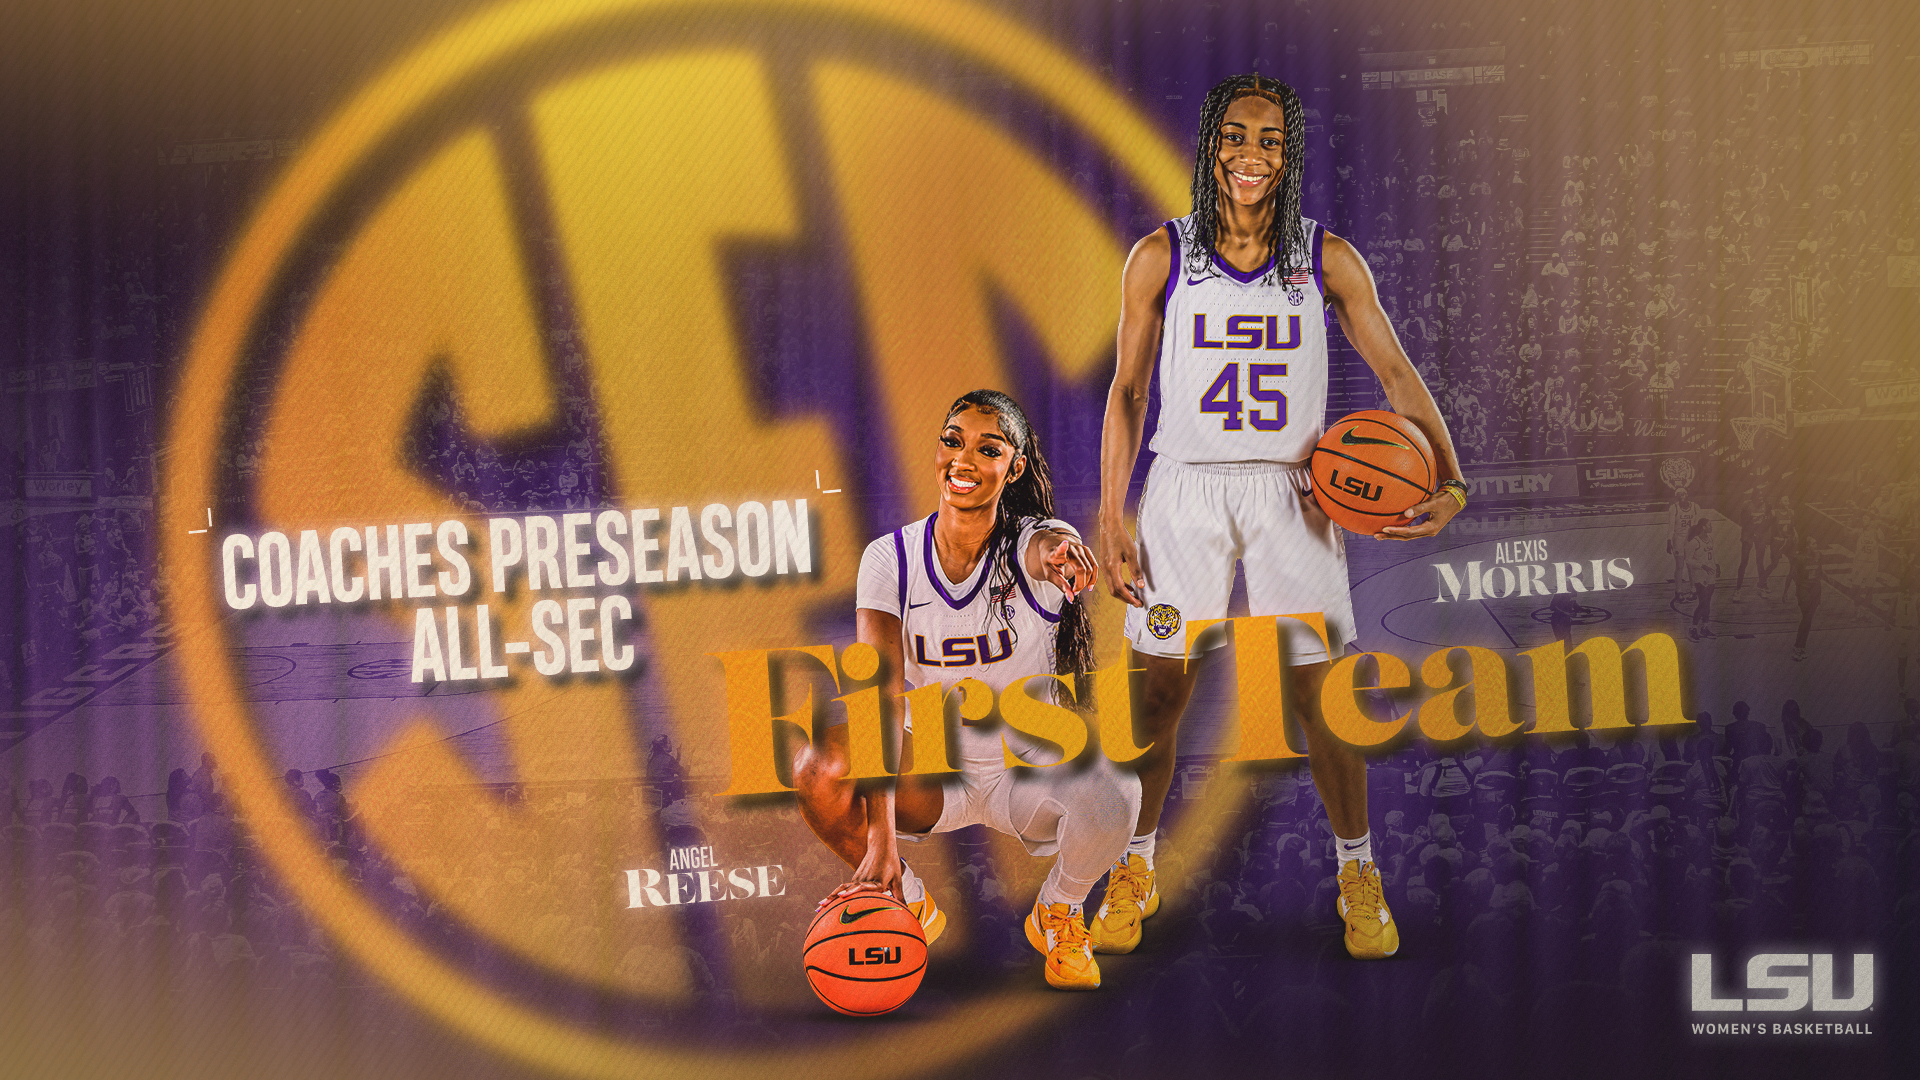 Morris And Reese Tabbed Preseason All SEC First Team By League's Coaches